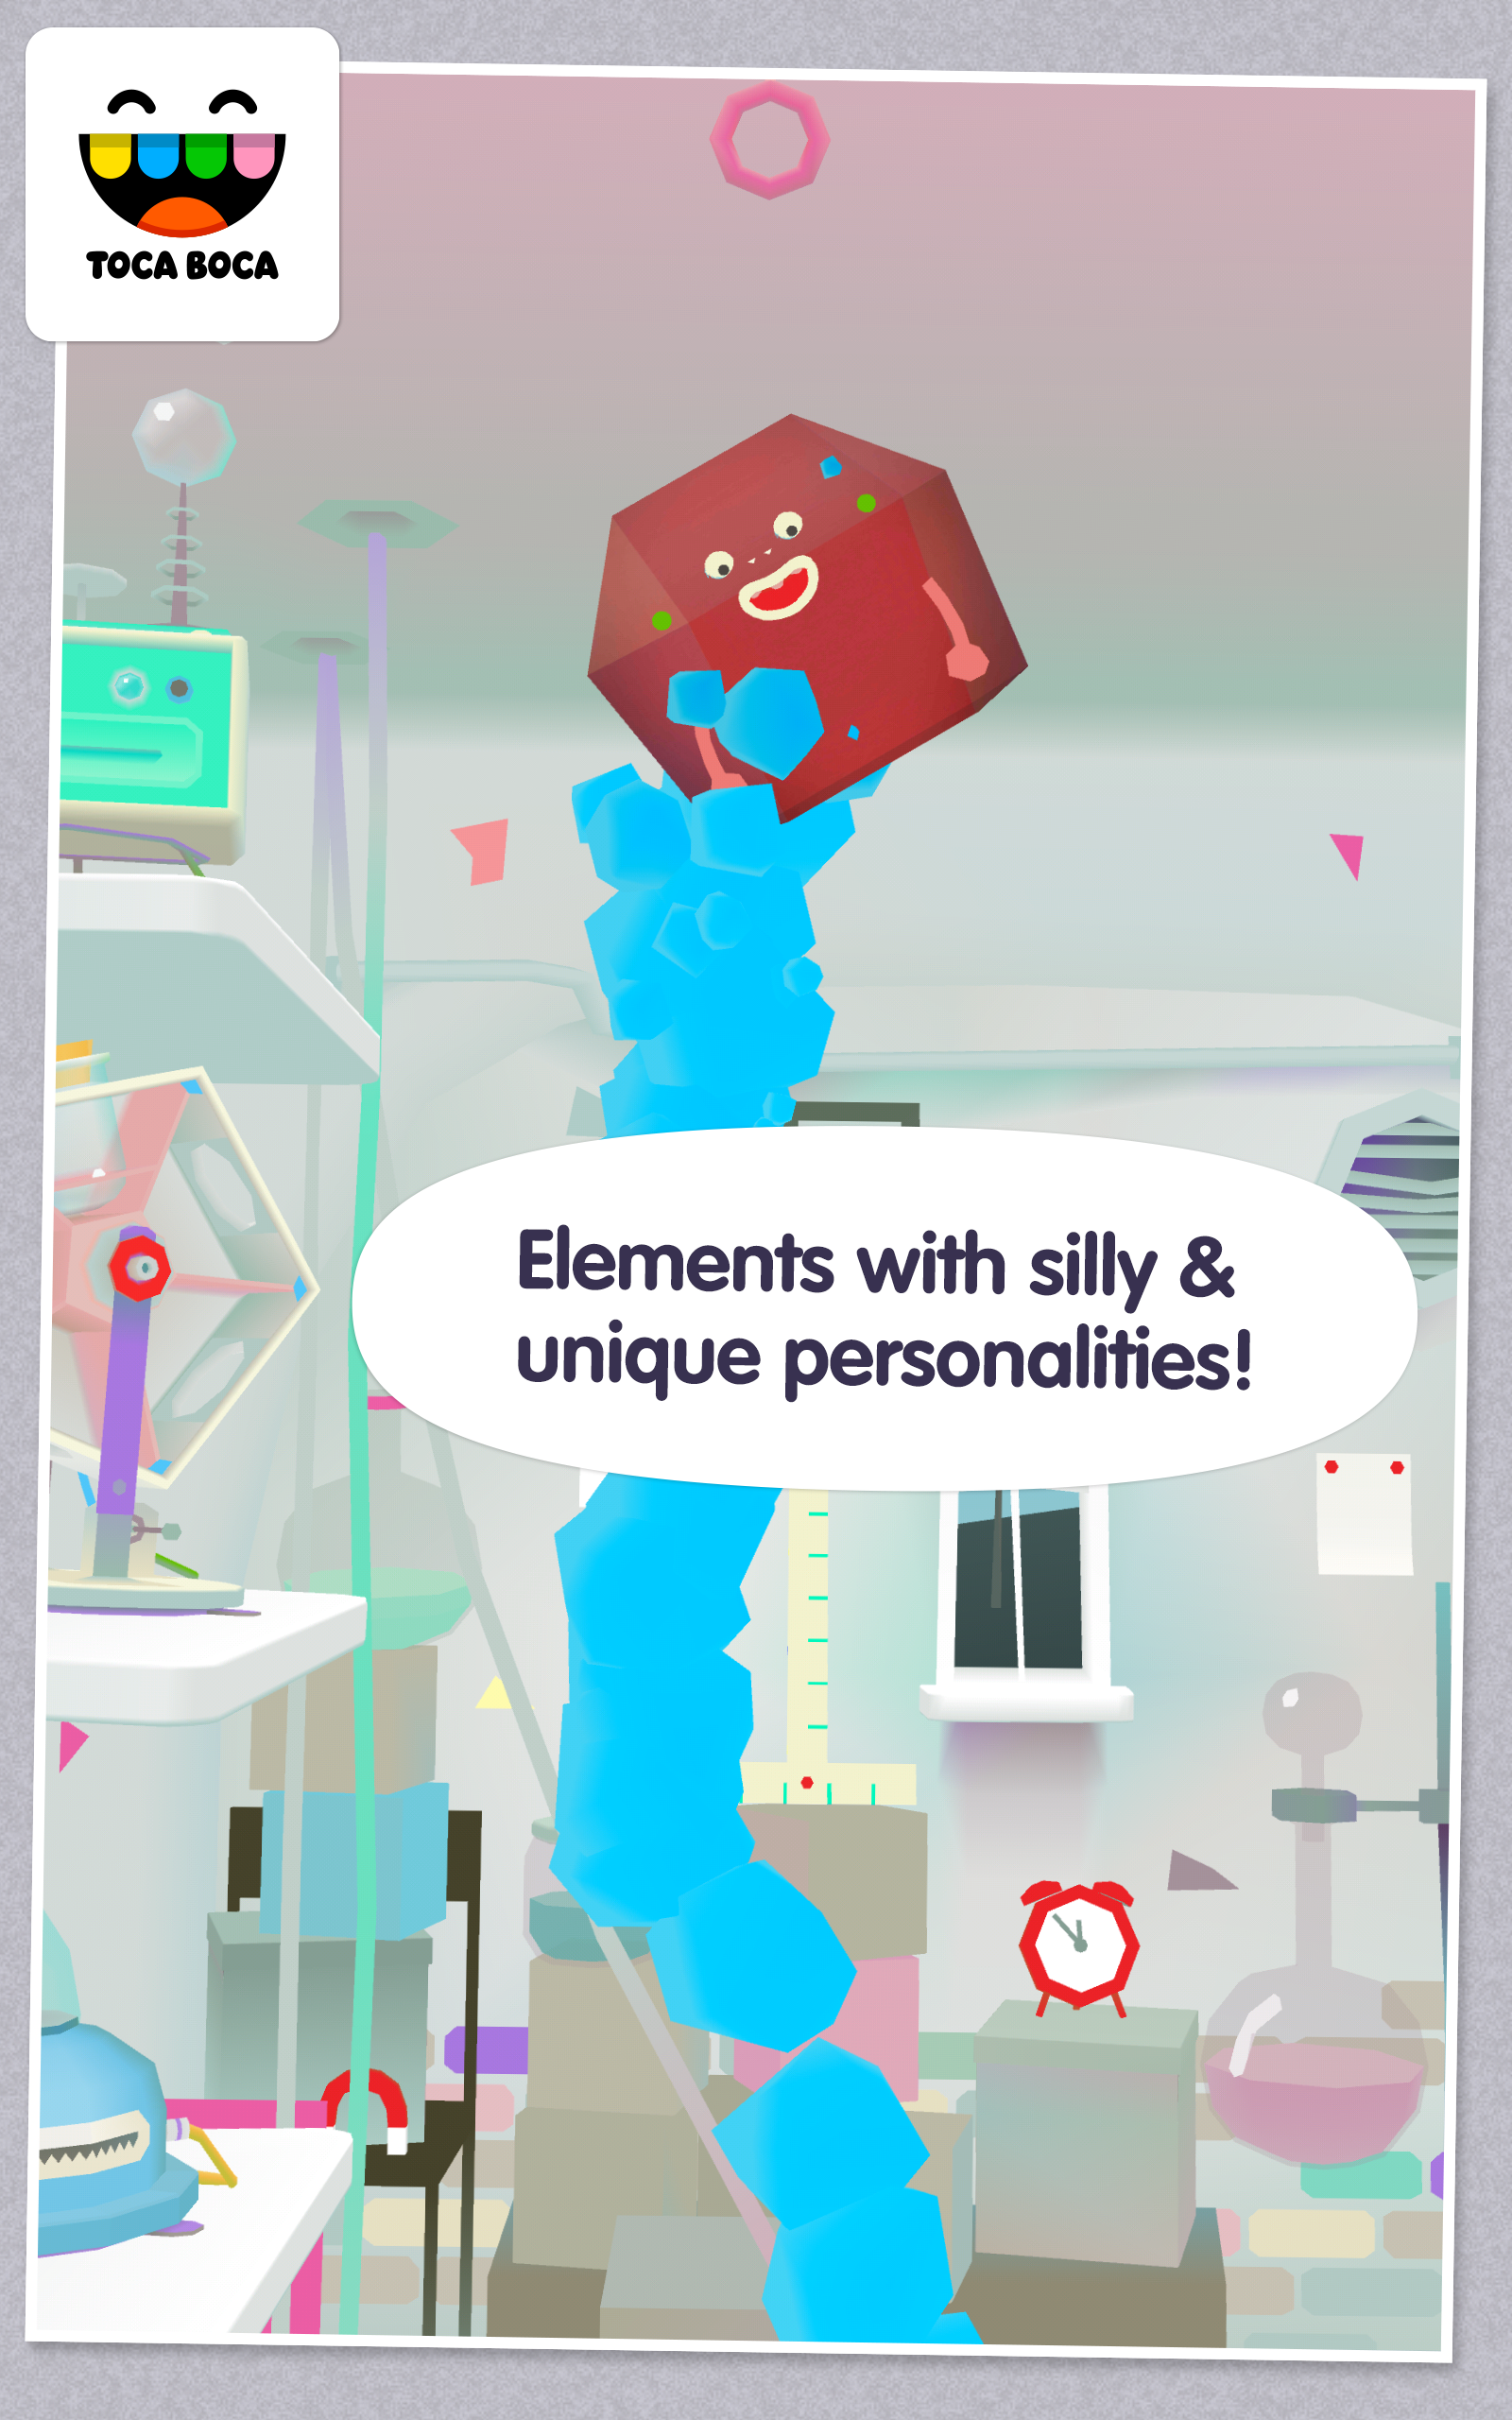 toca lab elements free to play